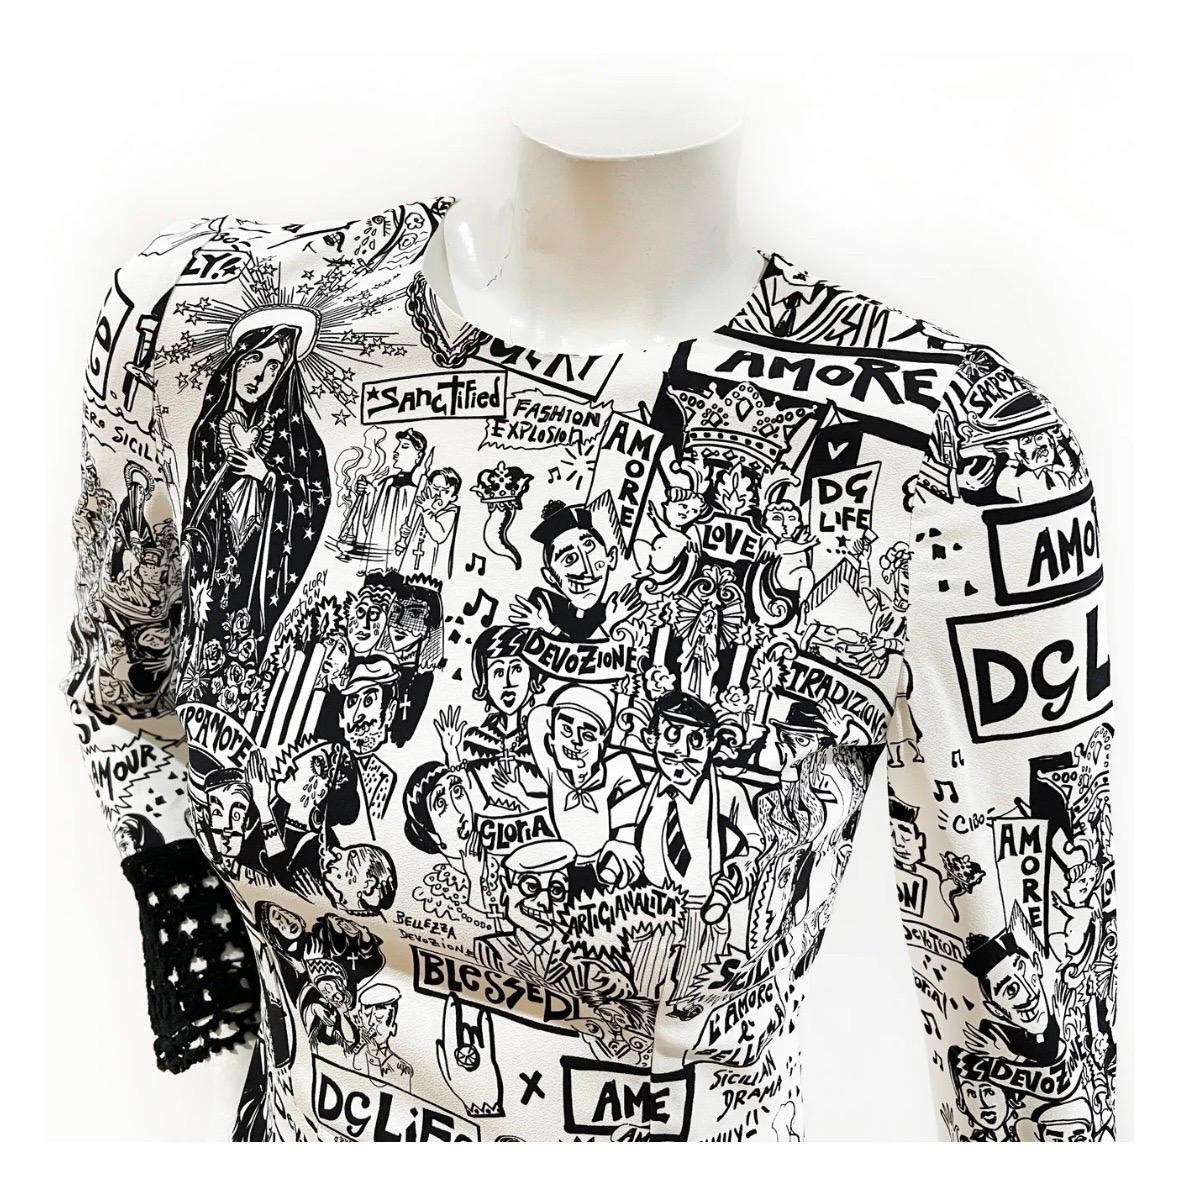 Graffiti logo print dress by Dolce & Gabbana 
Fall 2022
Made in Italy 
White with black graffiti logo doodling throughout
Black crochet lace cuff and bottom hem detail 
Back zip closure 
Long sleeves
Hits between knee and ankle
Back slit 
Charmeuse